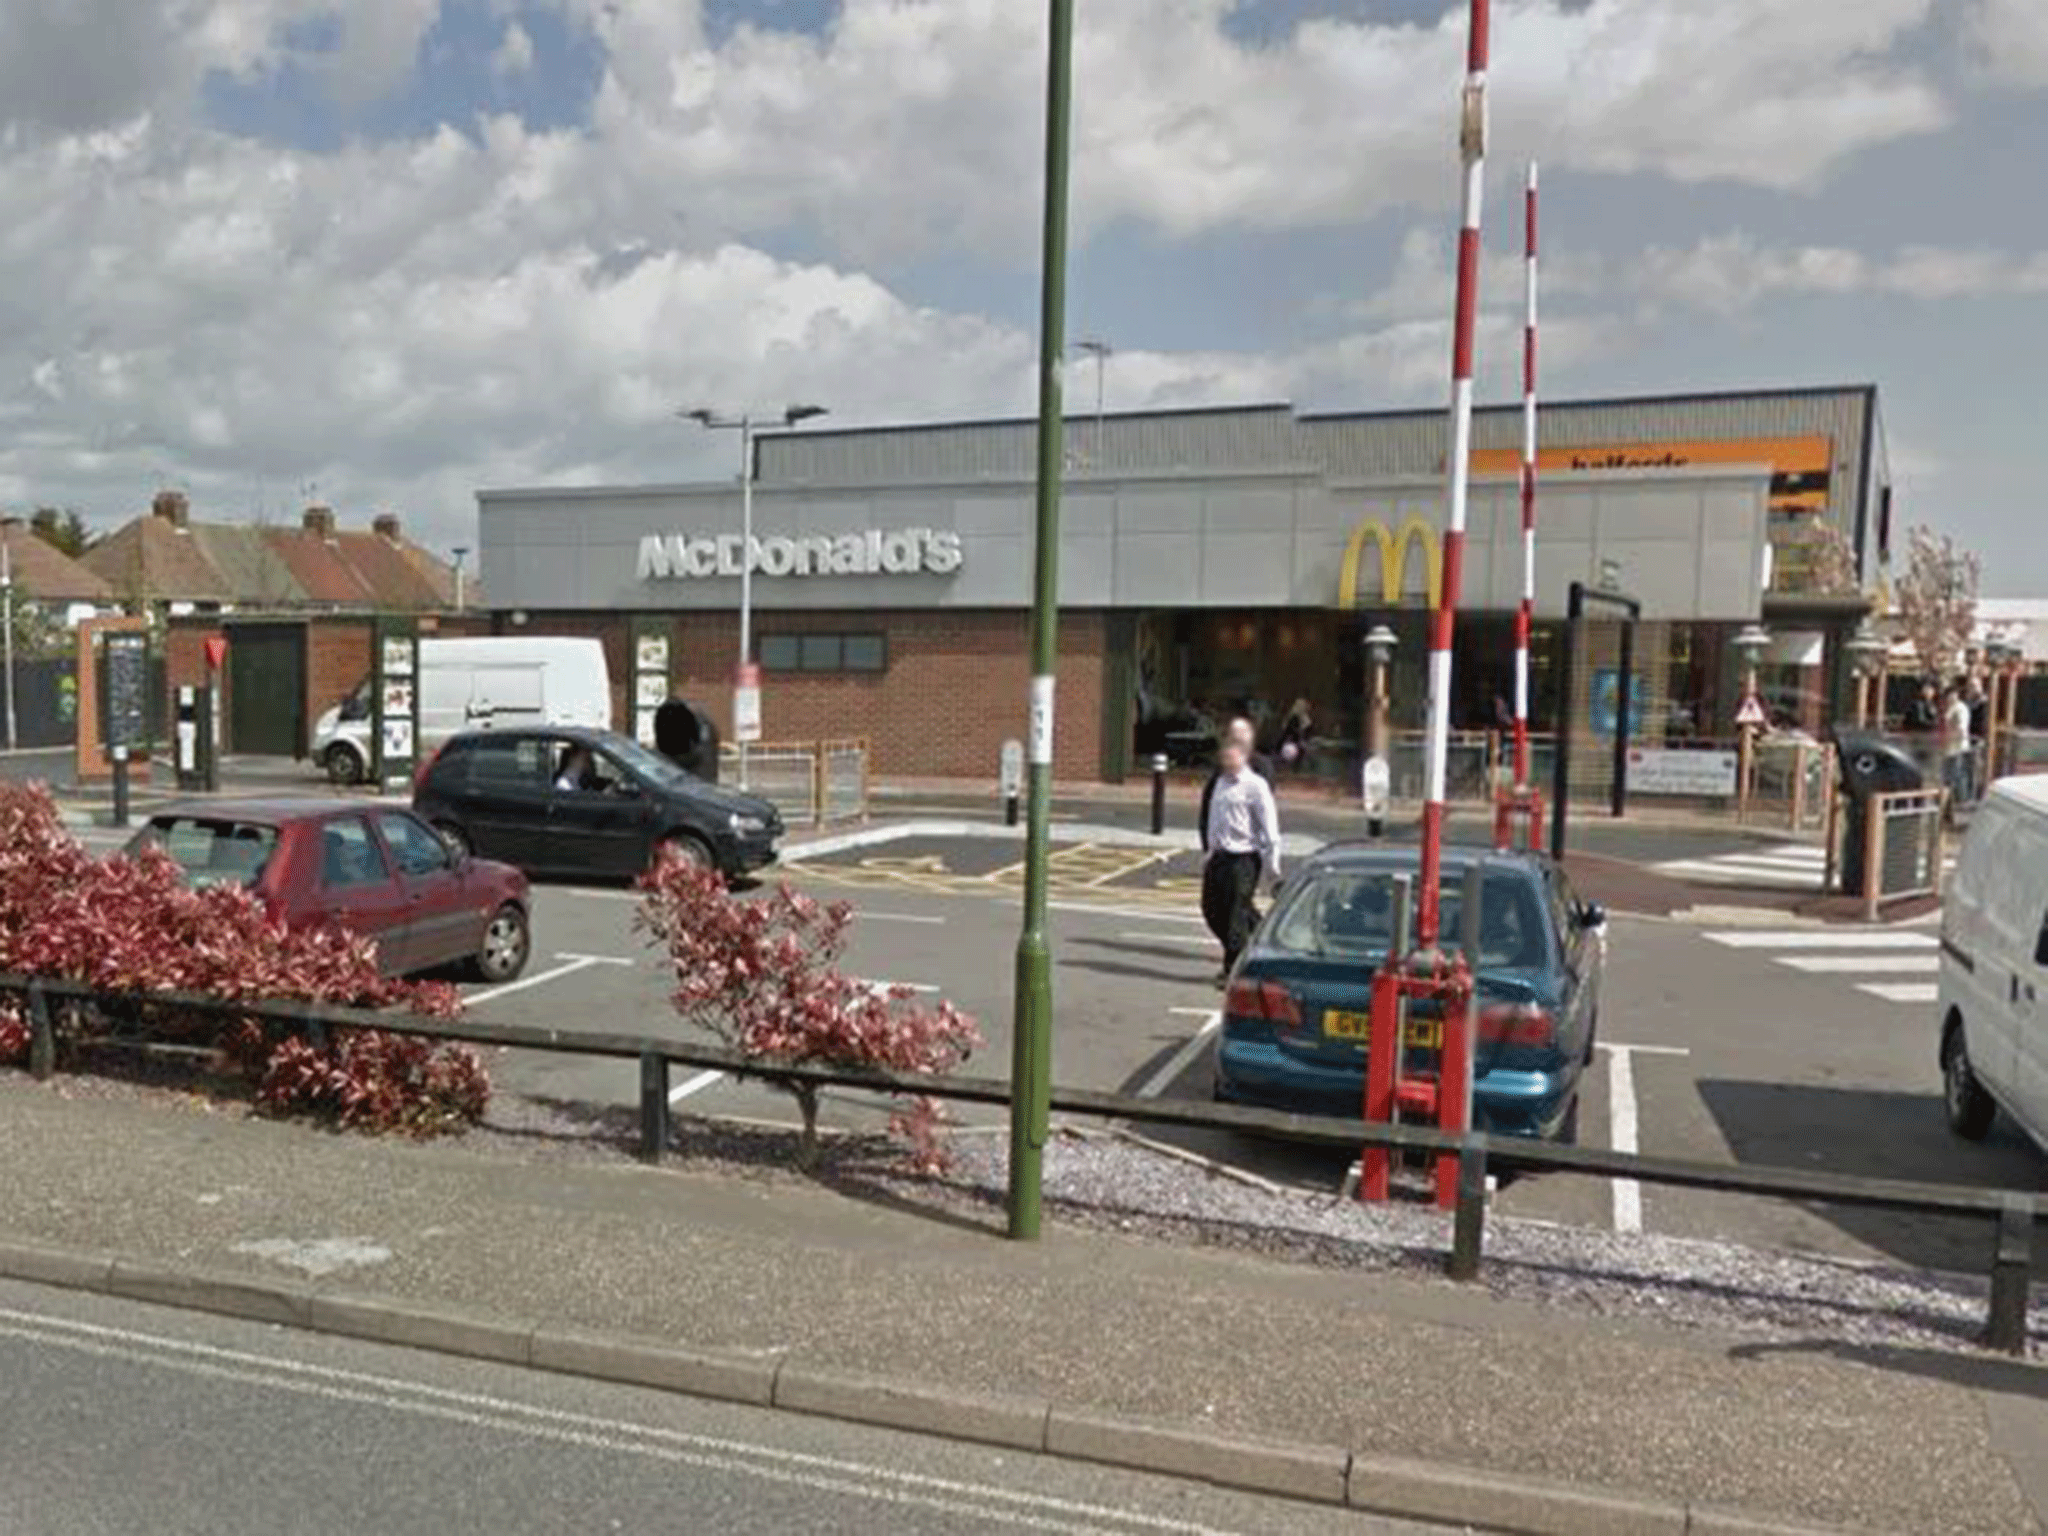 The McDonald's branch on Eastern Avenue, Shoreham in West Sussex